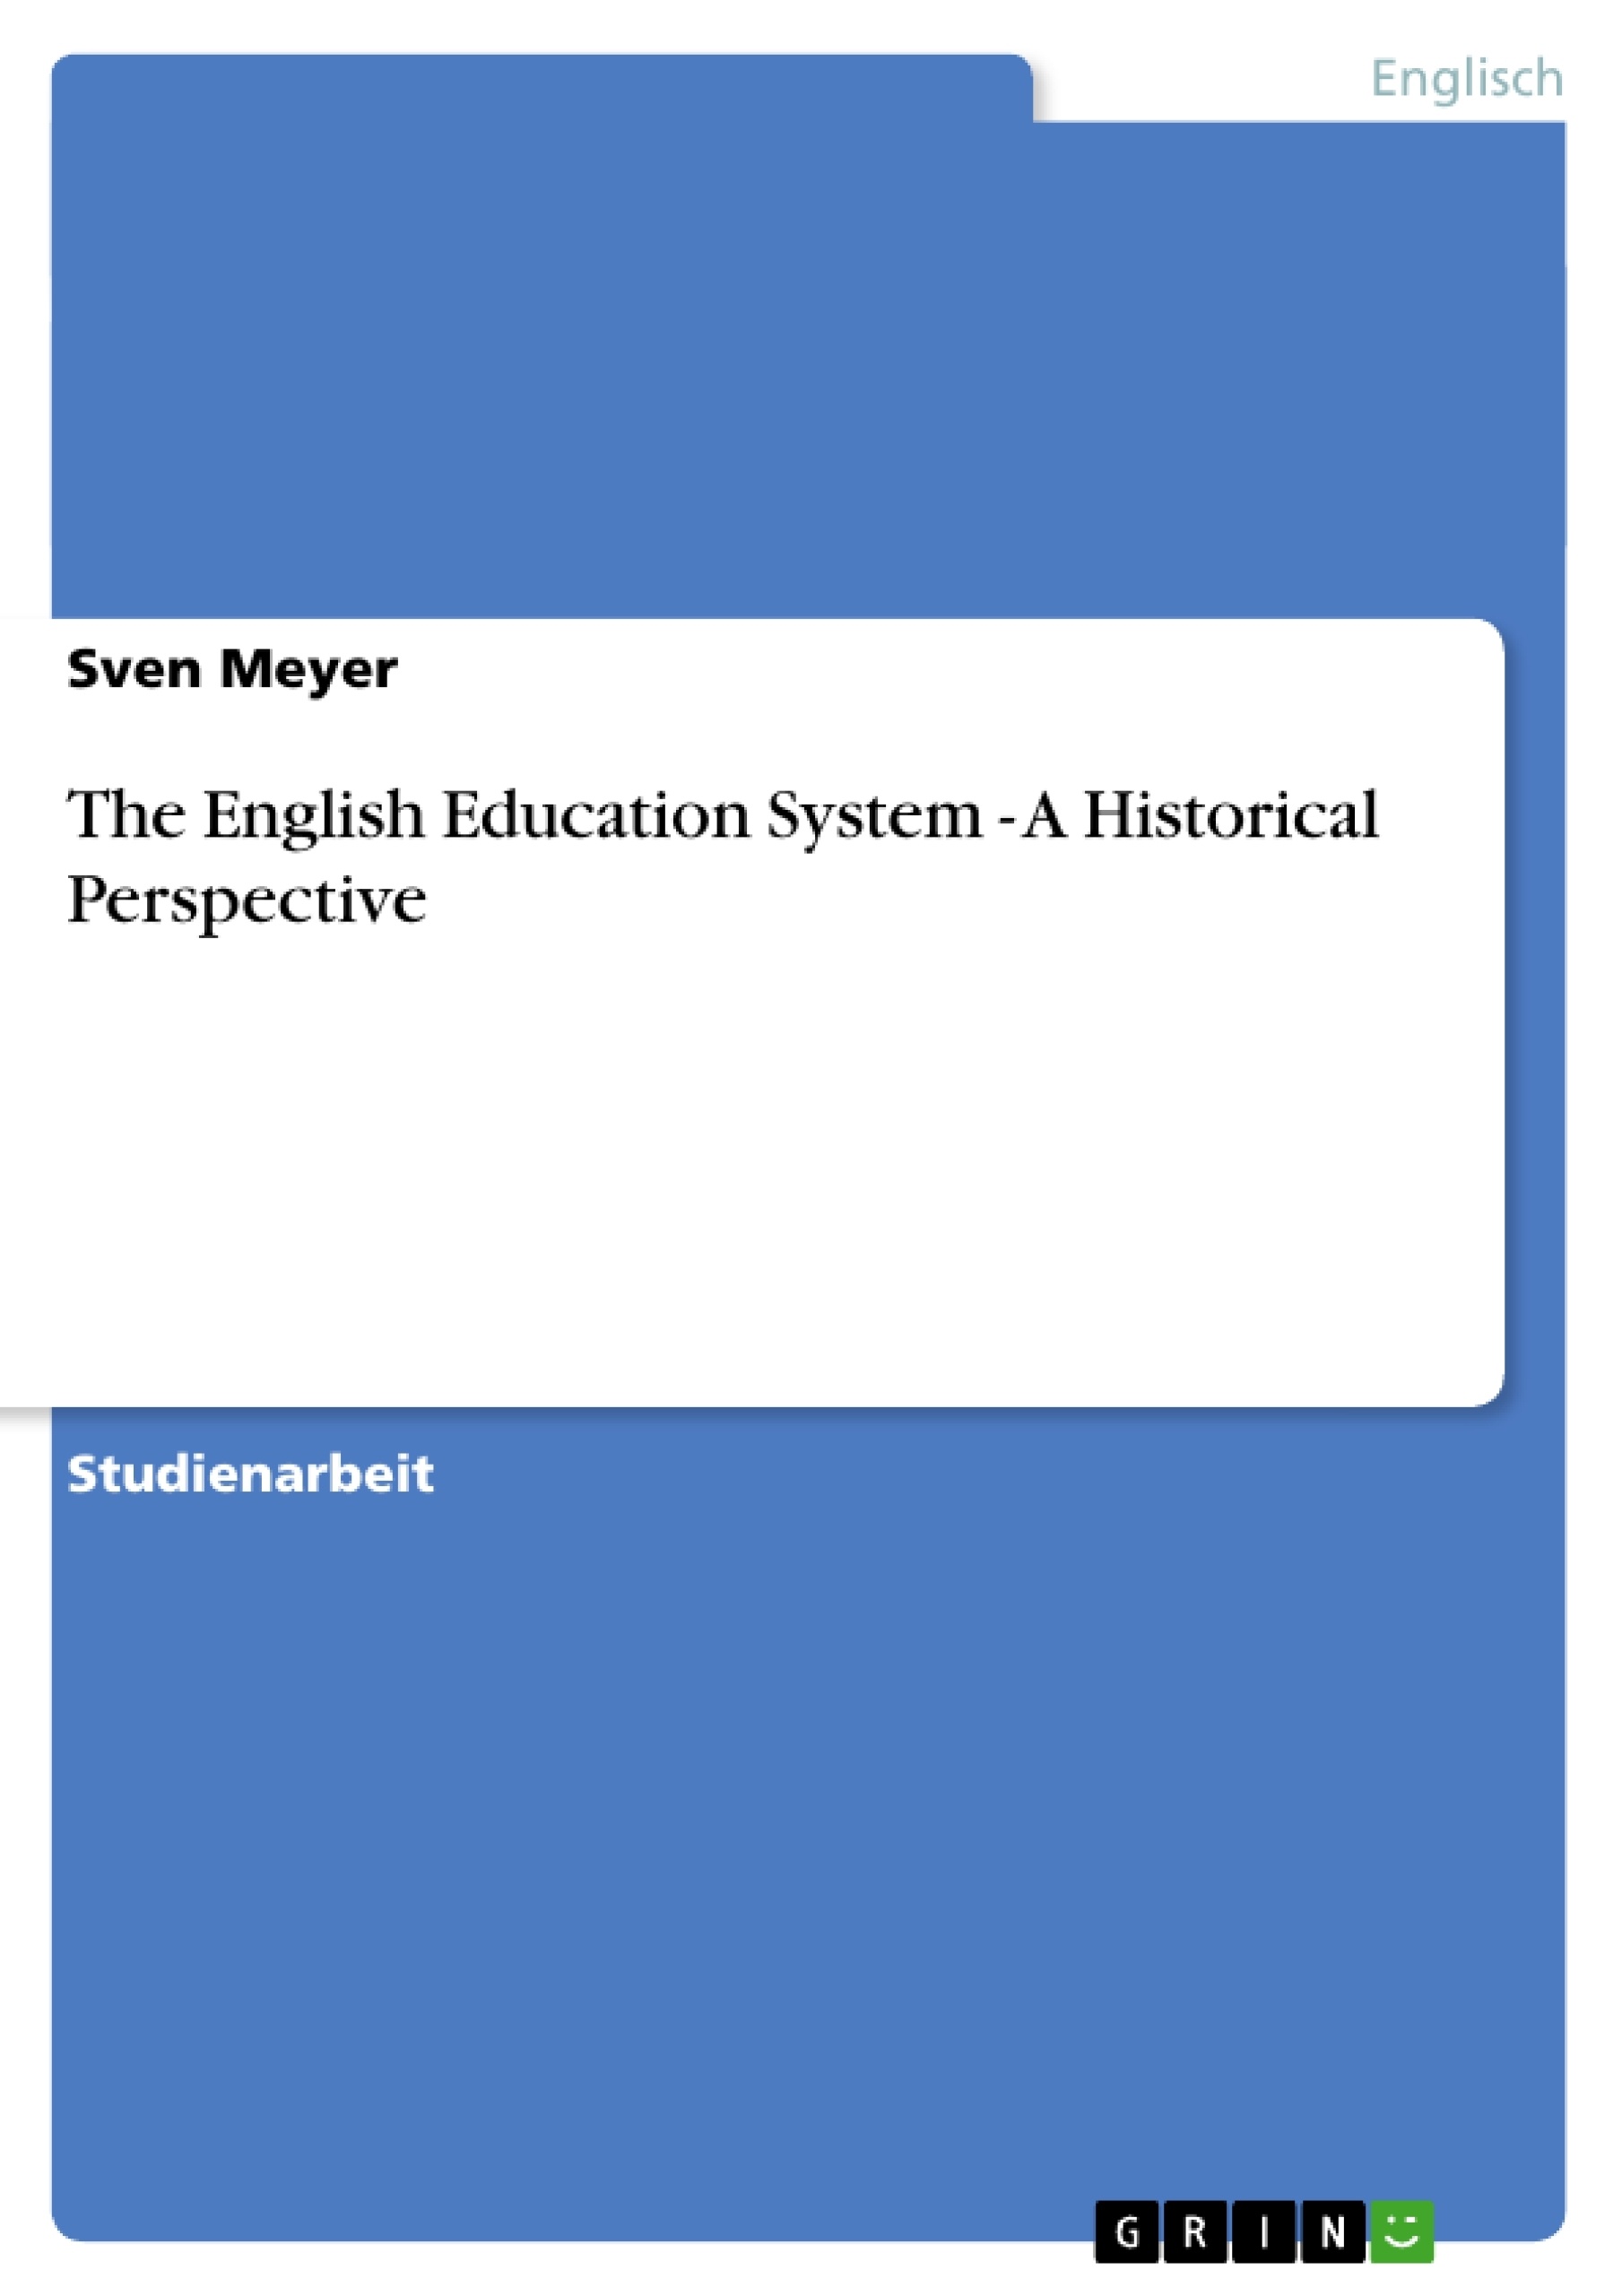 Título: The English Education System - A Historical Perspective